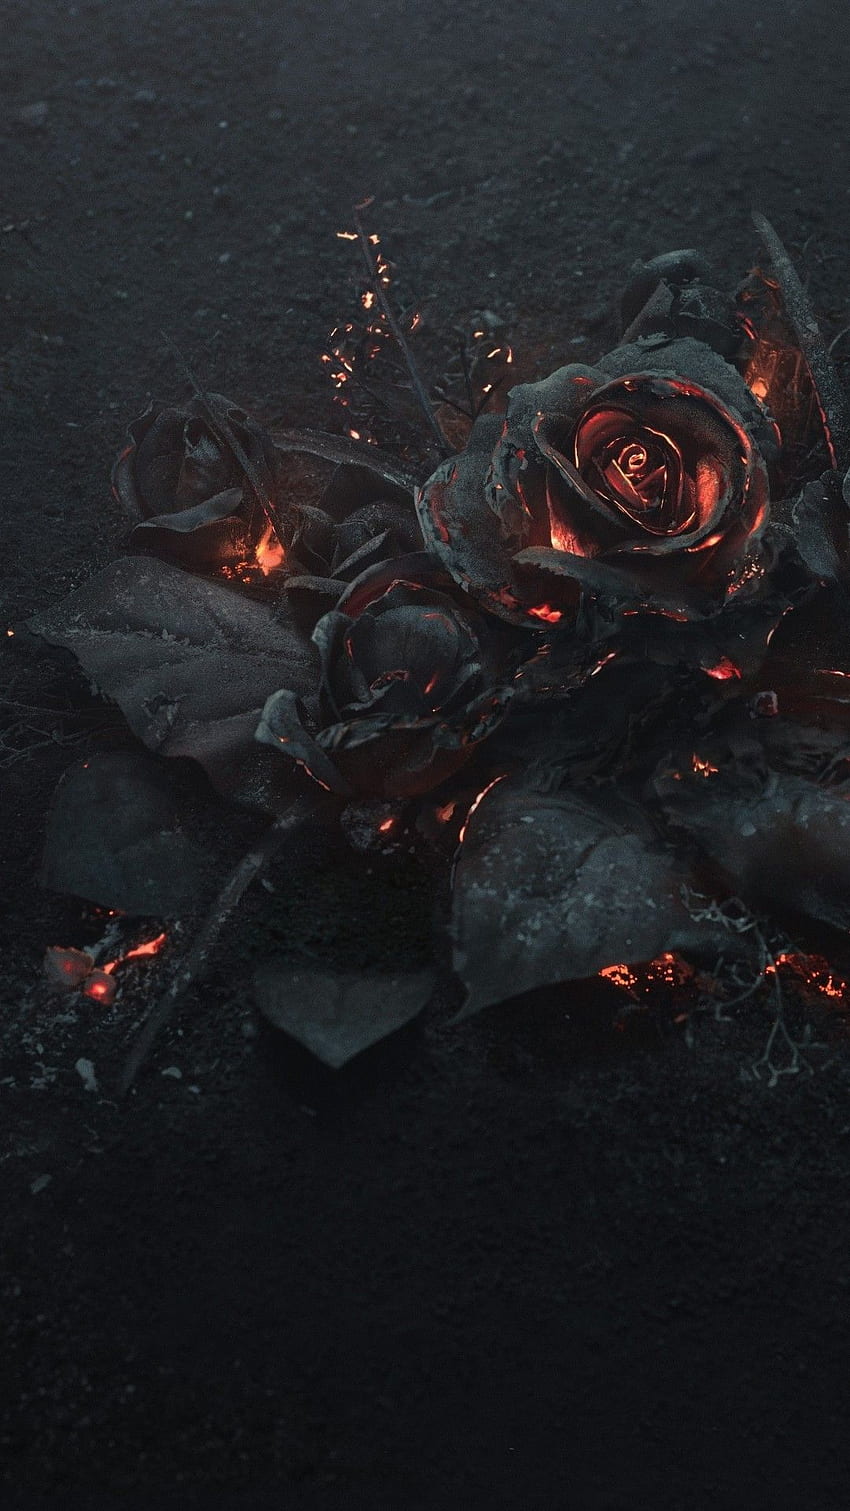 Rose Ashes, Fire, Black, Dark Theme for iPhone 8, iPhone 7 Plus, iPhone 6+, Sony Xperia Z, HTC One HD phone wallpaper